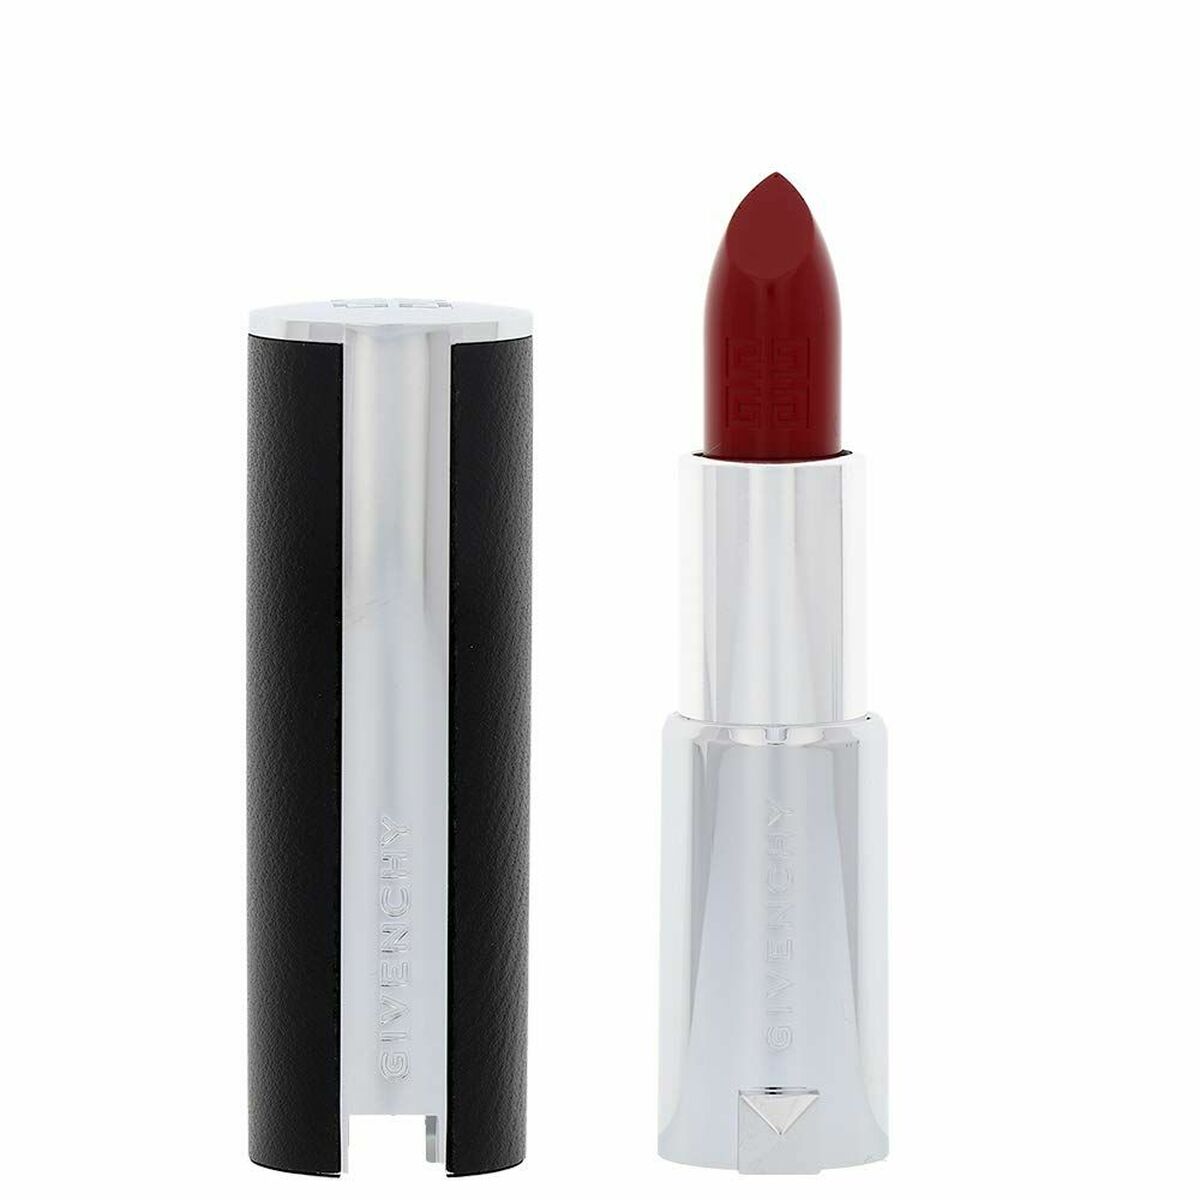 Lipstick Givenchy Le Rouge Lips N307 3,4 g-0